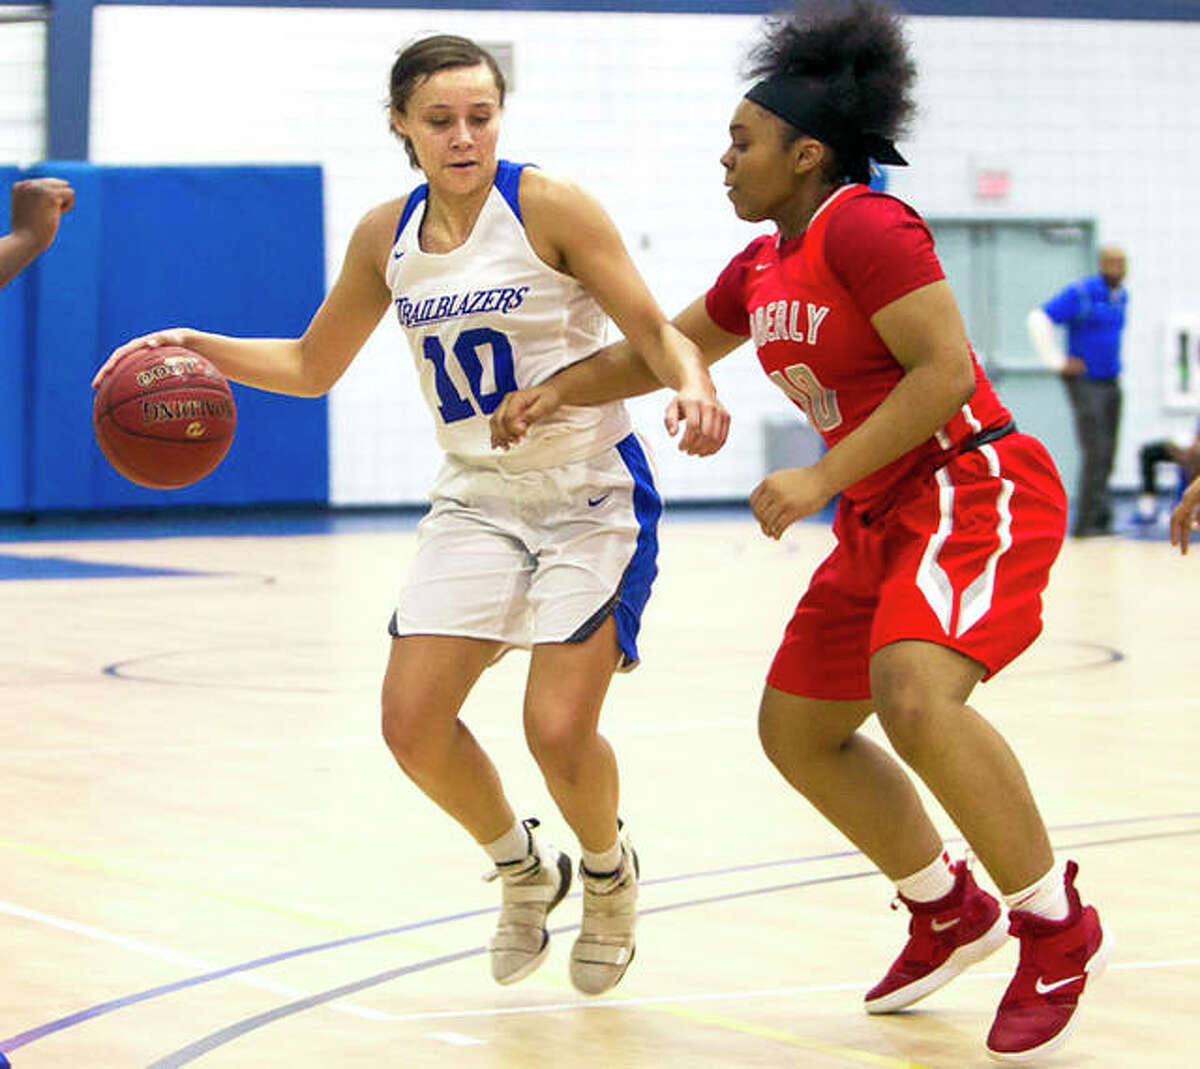 Jocelyn Williams of LCCC (10) scored at an 11-1 ppg clip this season. She is a sophomore from Lincoln, Neb.